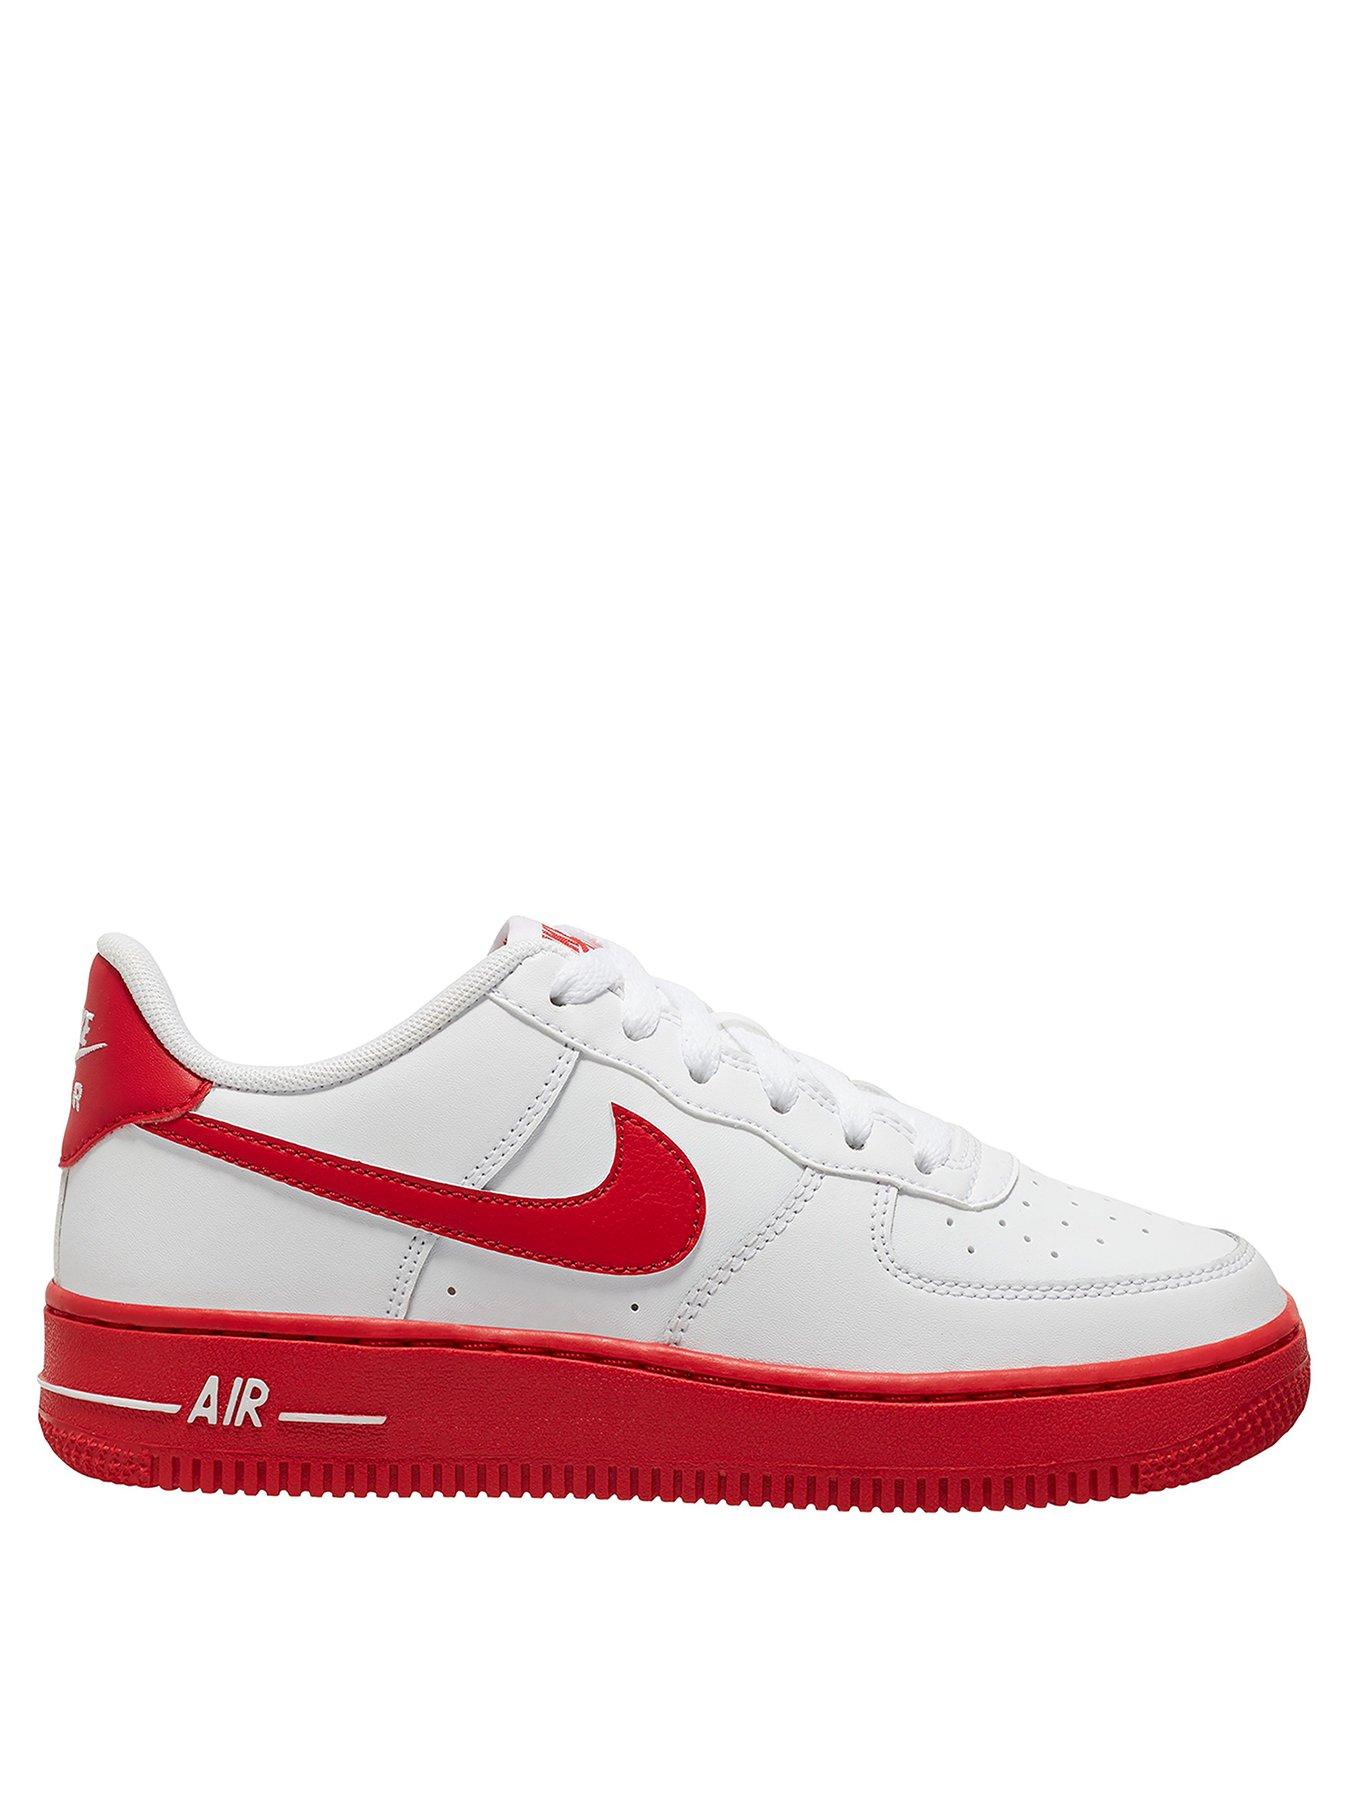 nike air force 1 junior size 5.5 white